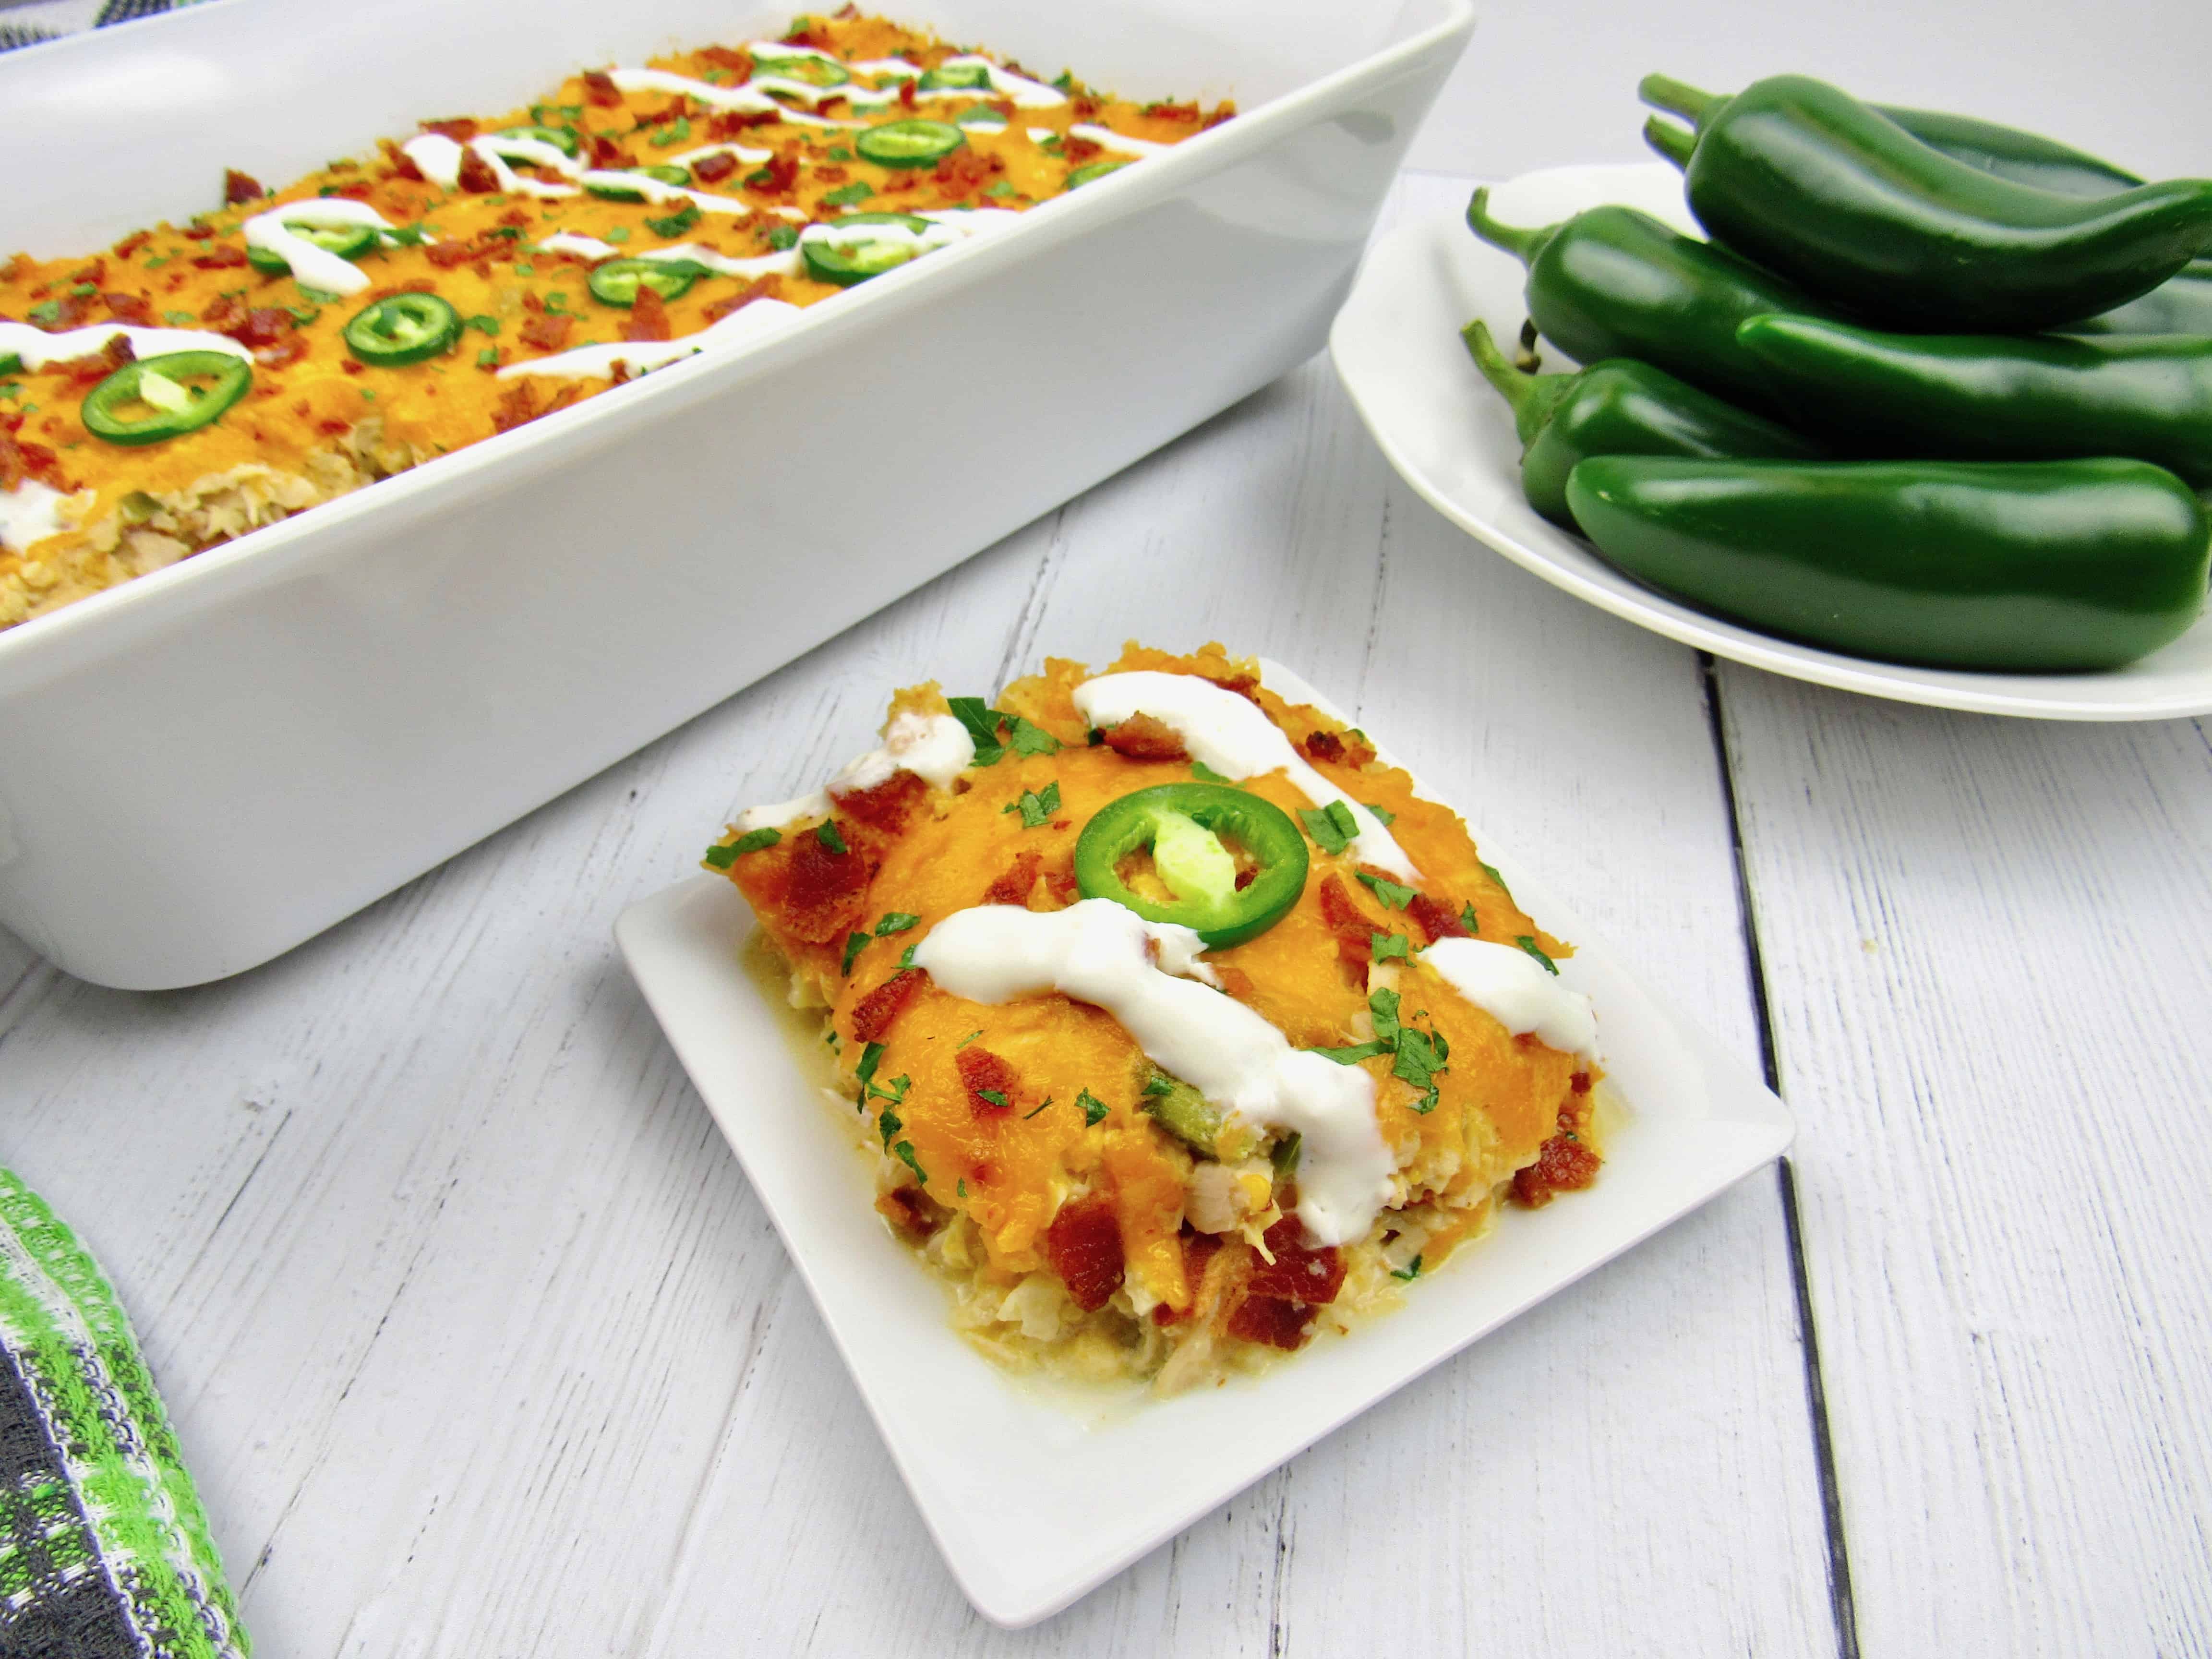 slice of jalapeno popper chicken casserole with casserole and bowl of peppers in background